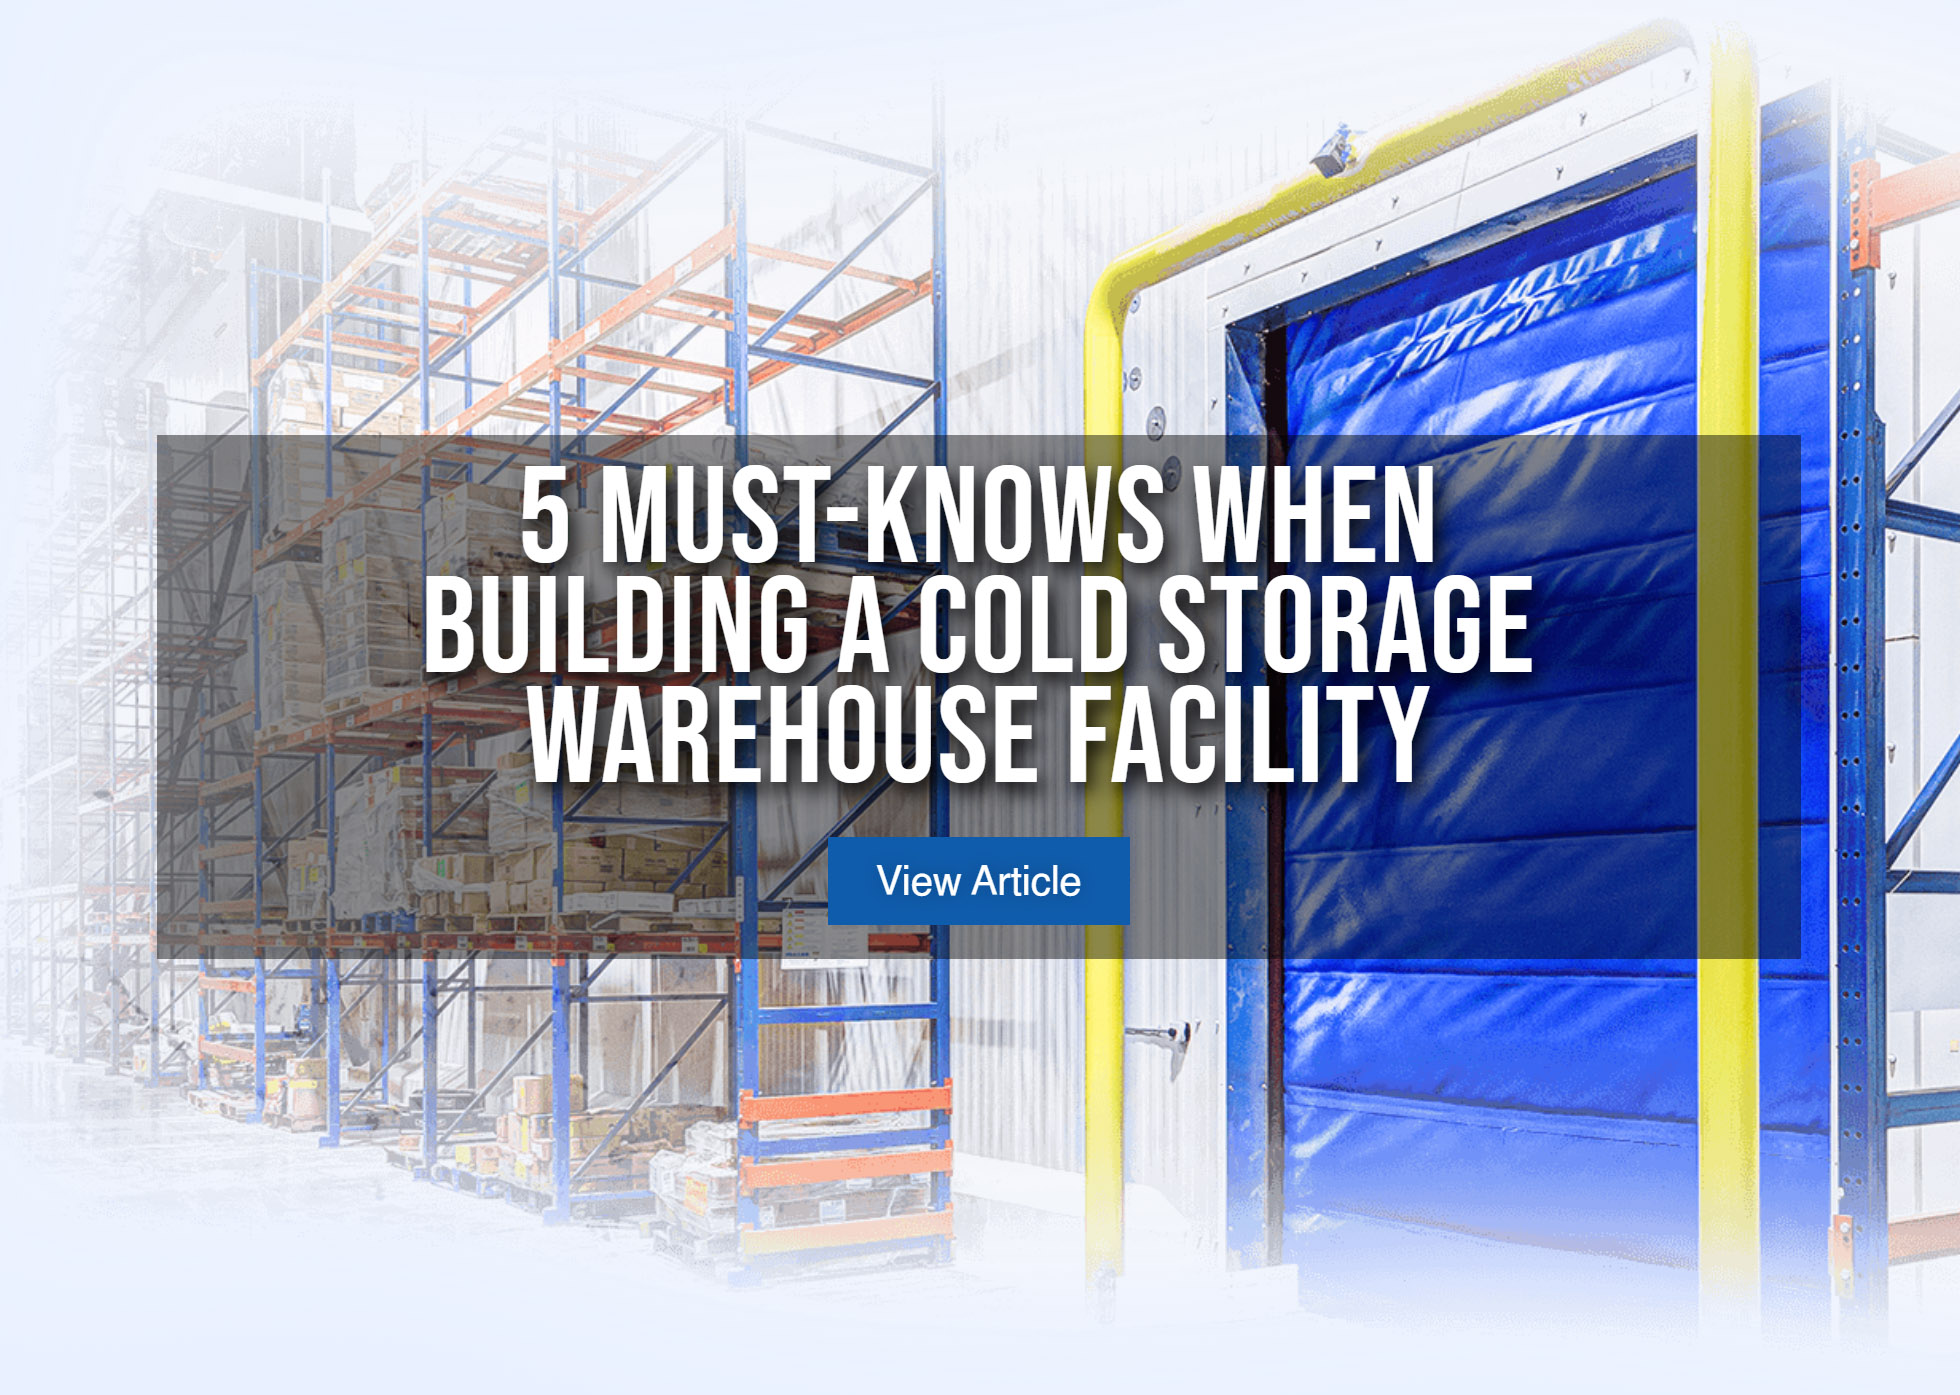 5 Must-Knows When Building a Cold Storage Warehouse Facility